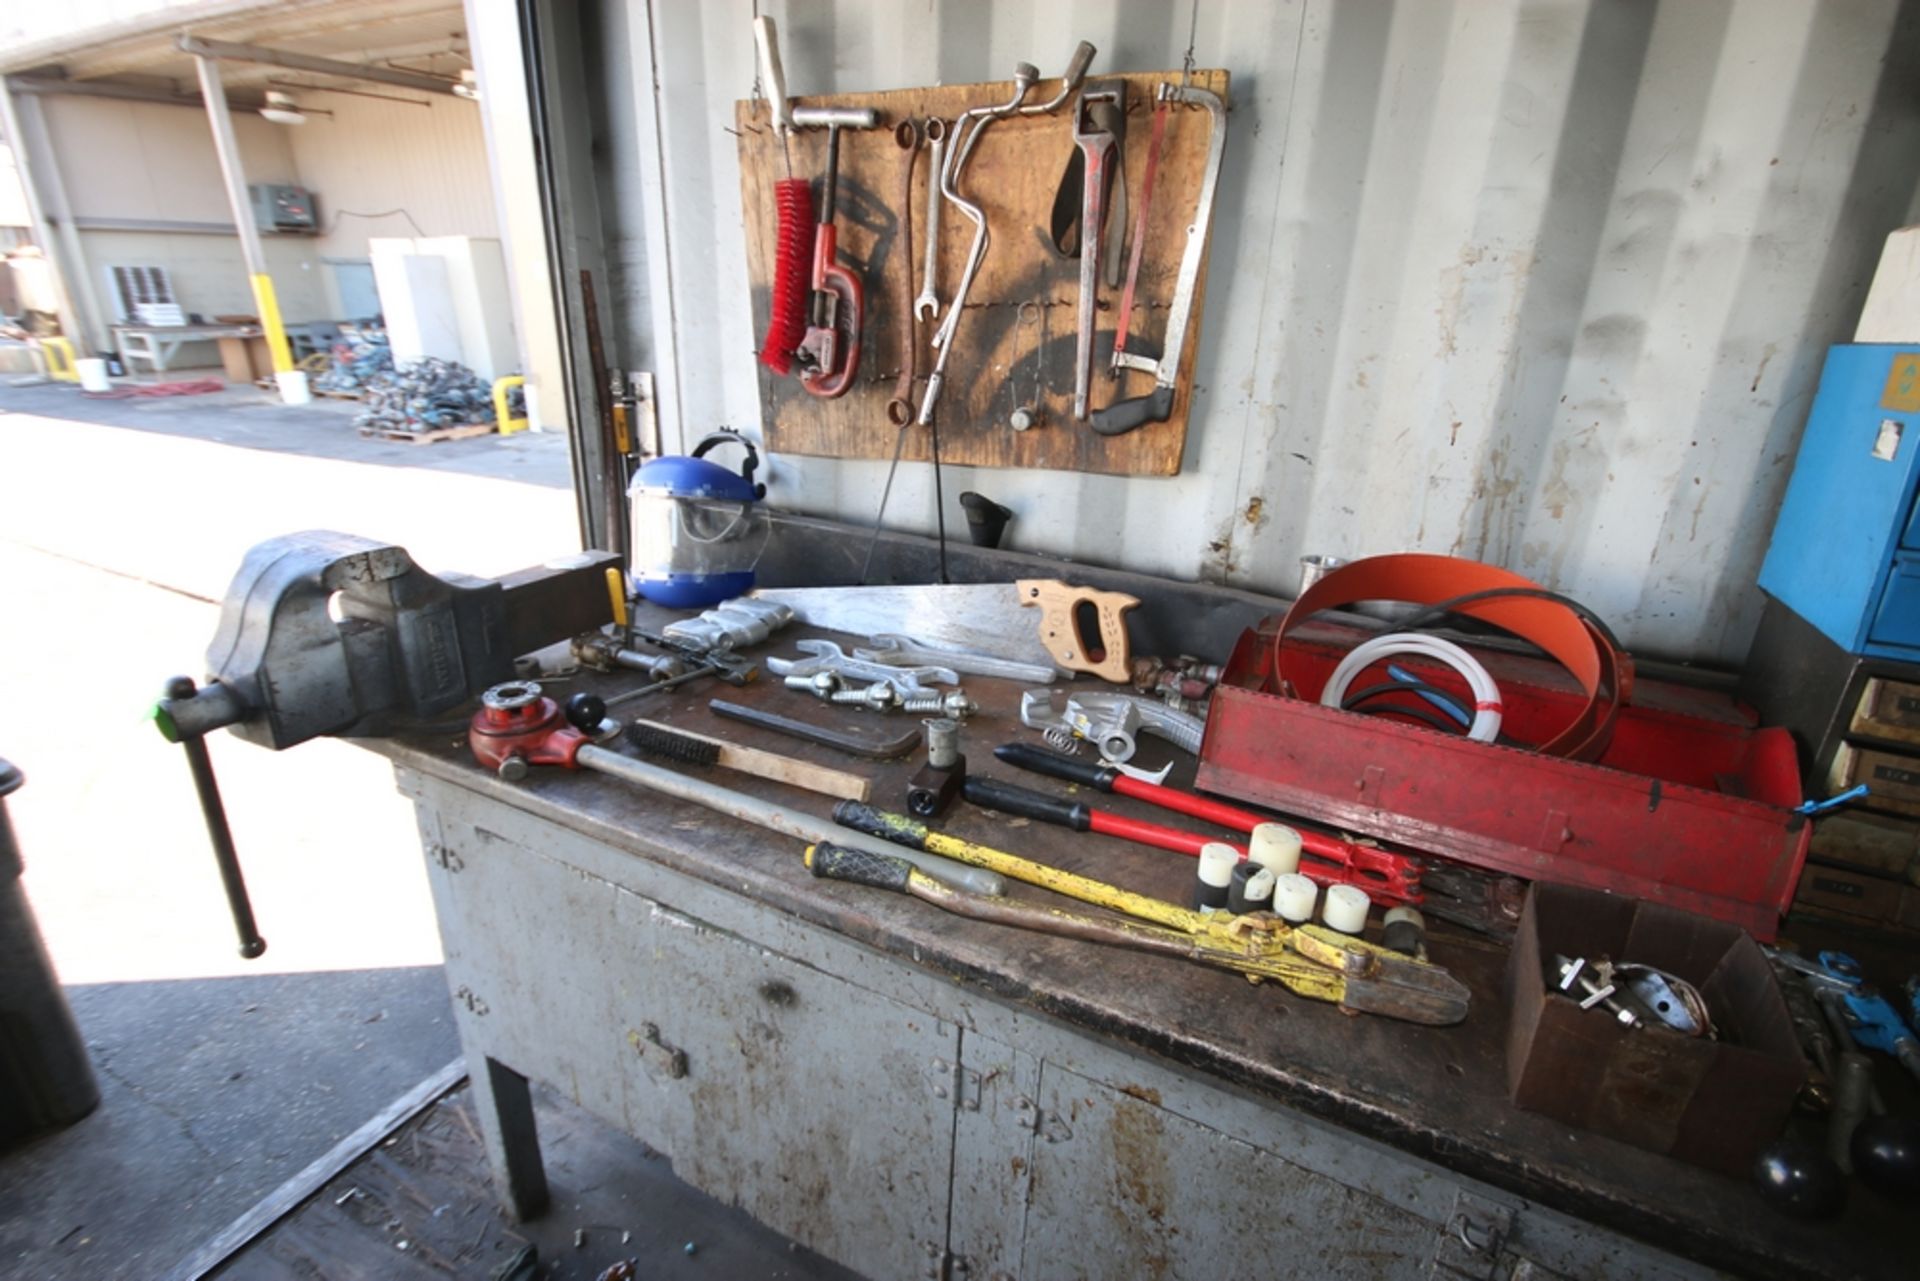 Shop Table with Contents, Includes (8) "C"-Clamps, Wrenches, Pipe Threaders, Lock Cutter, Manual - Image 4 of 4